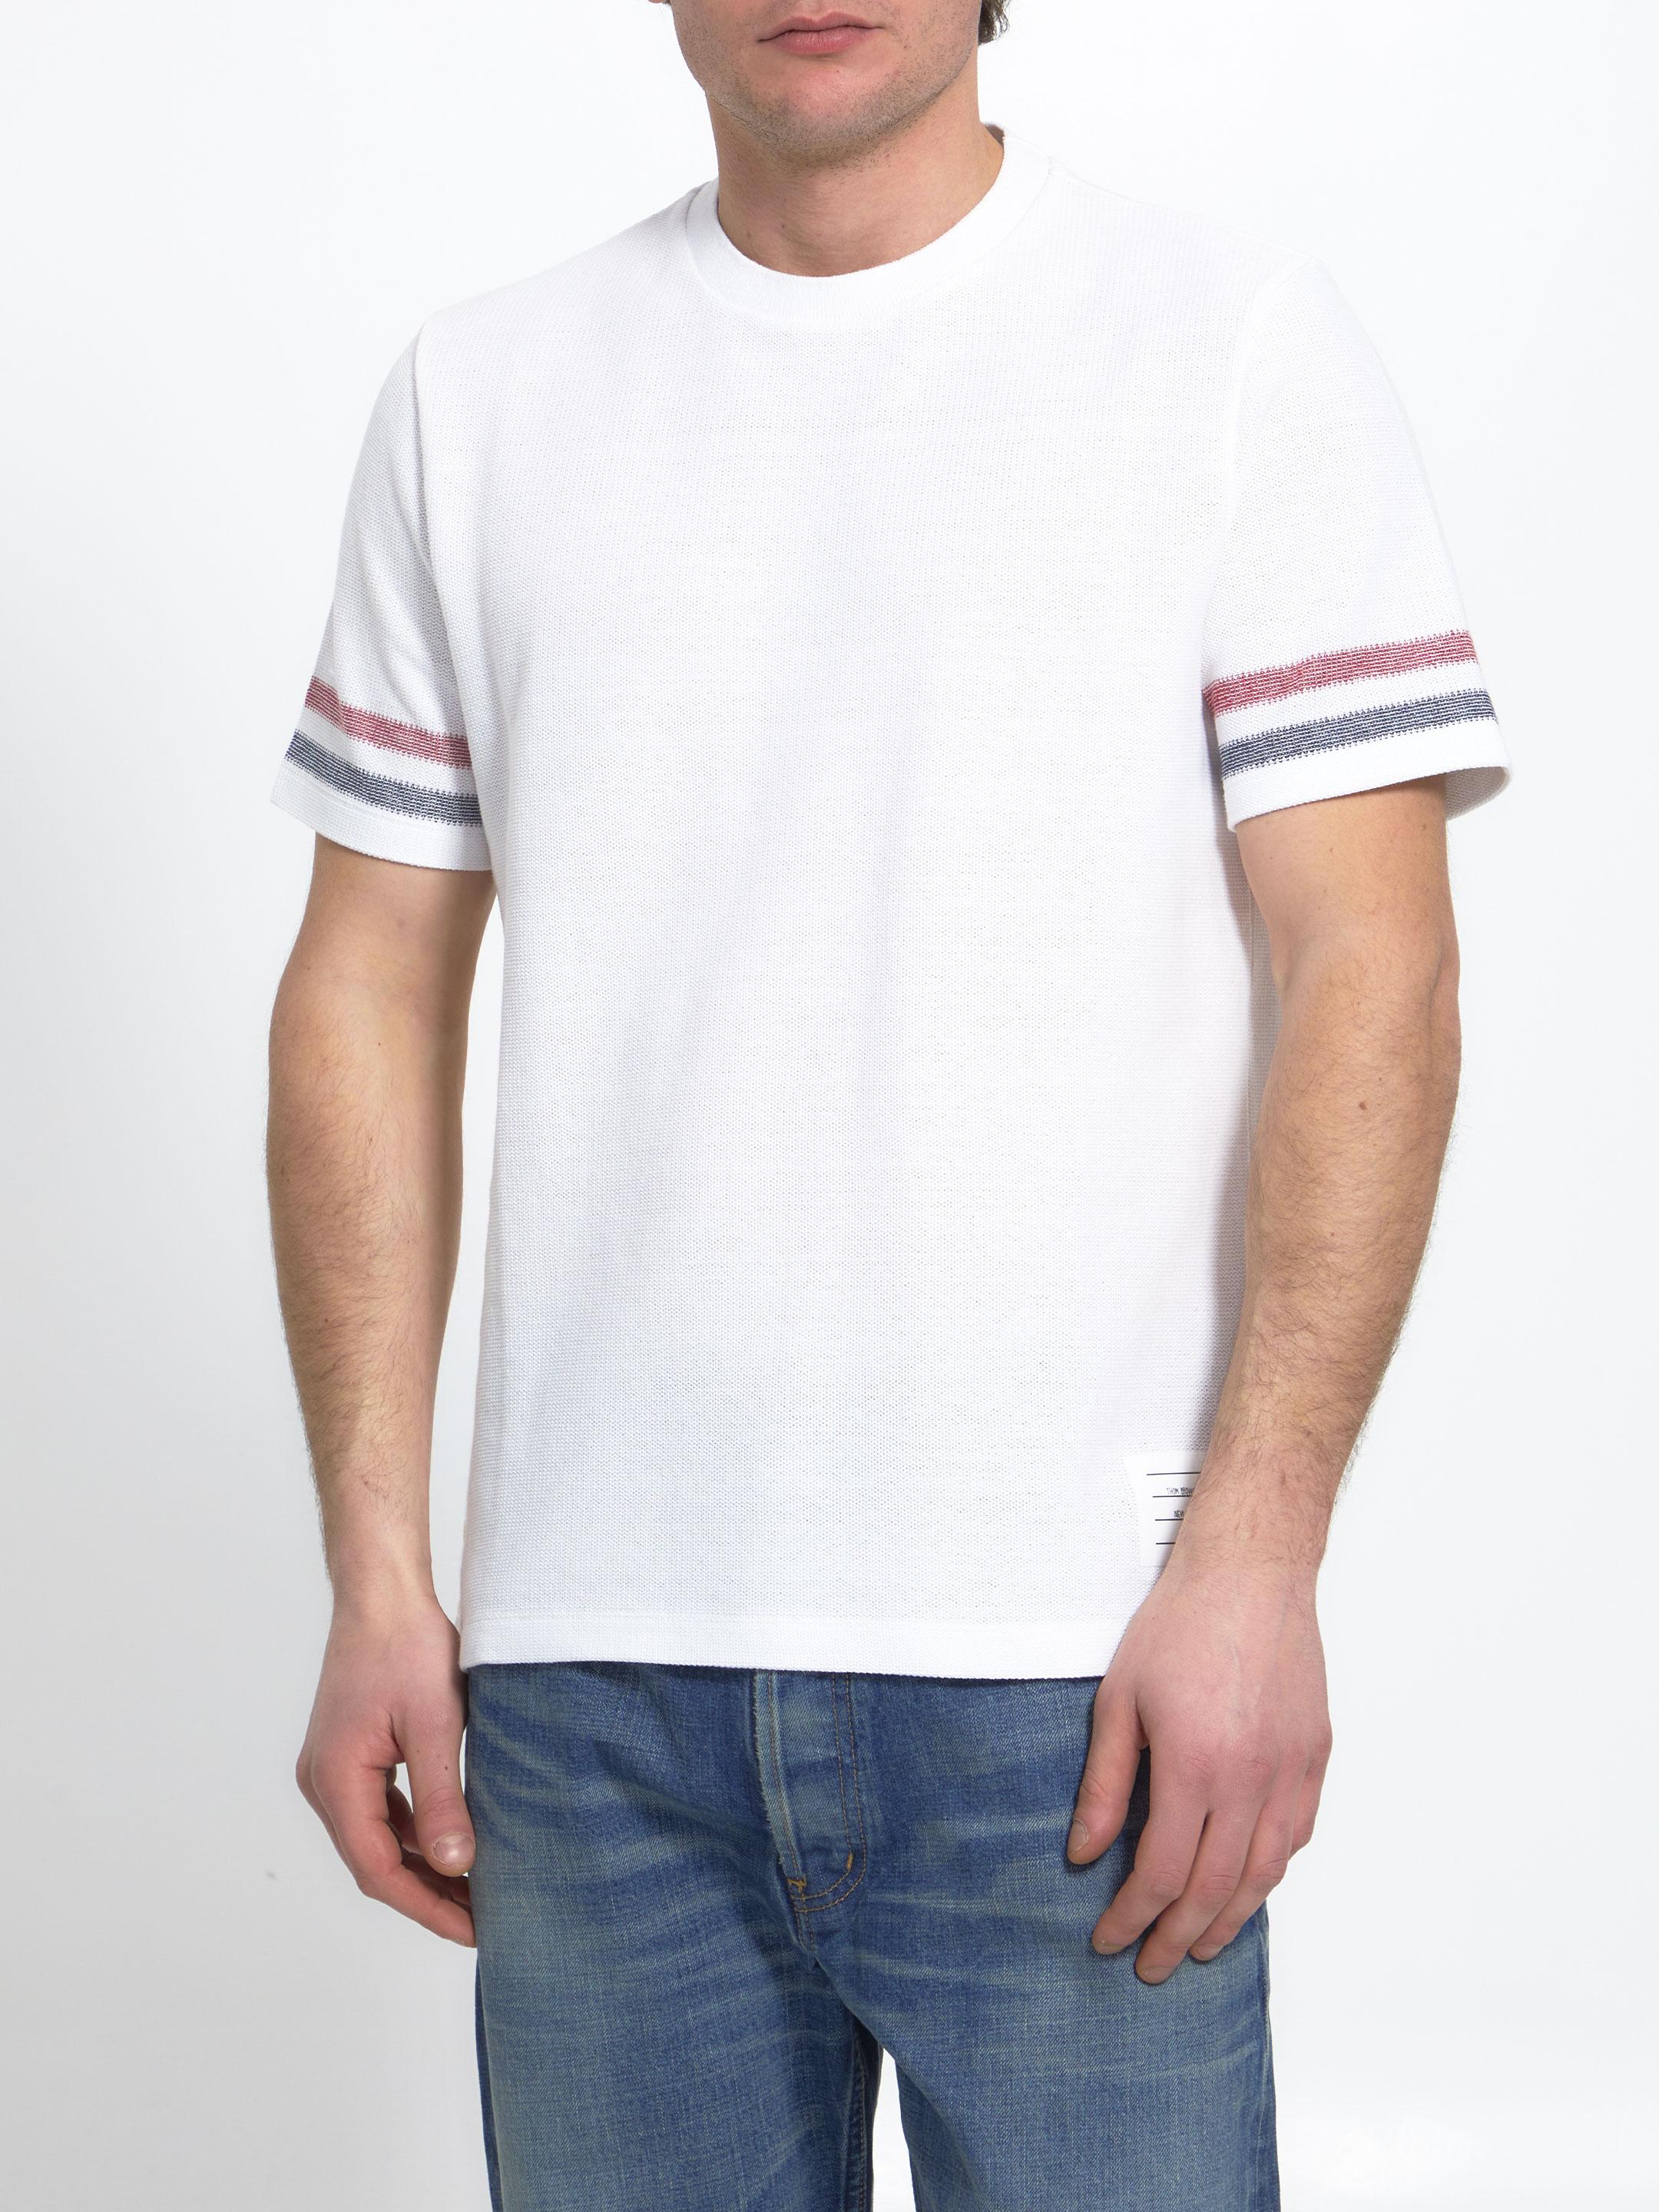 Thom Browne Textured Cotton T-shirt in White for Men | Lyst